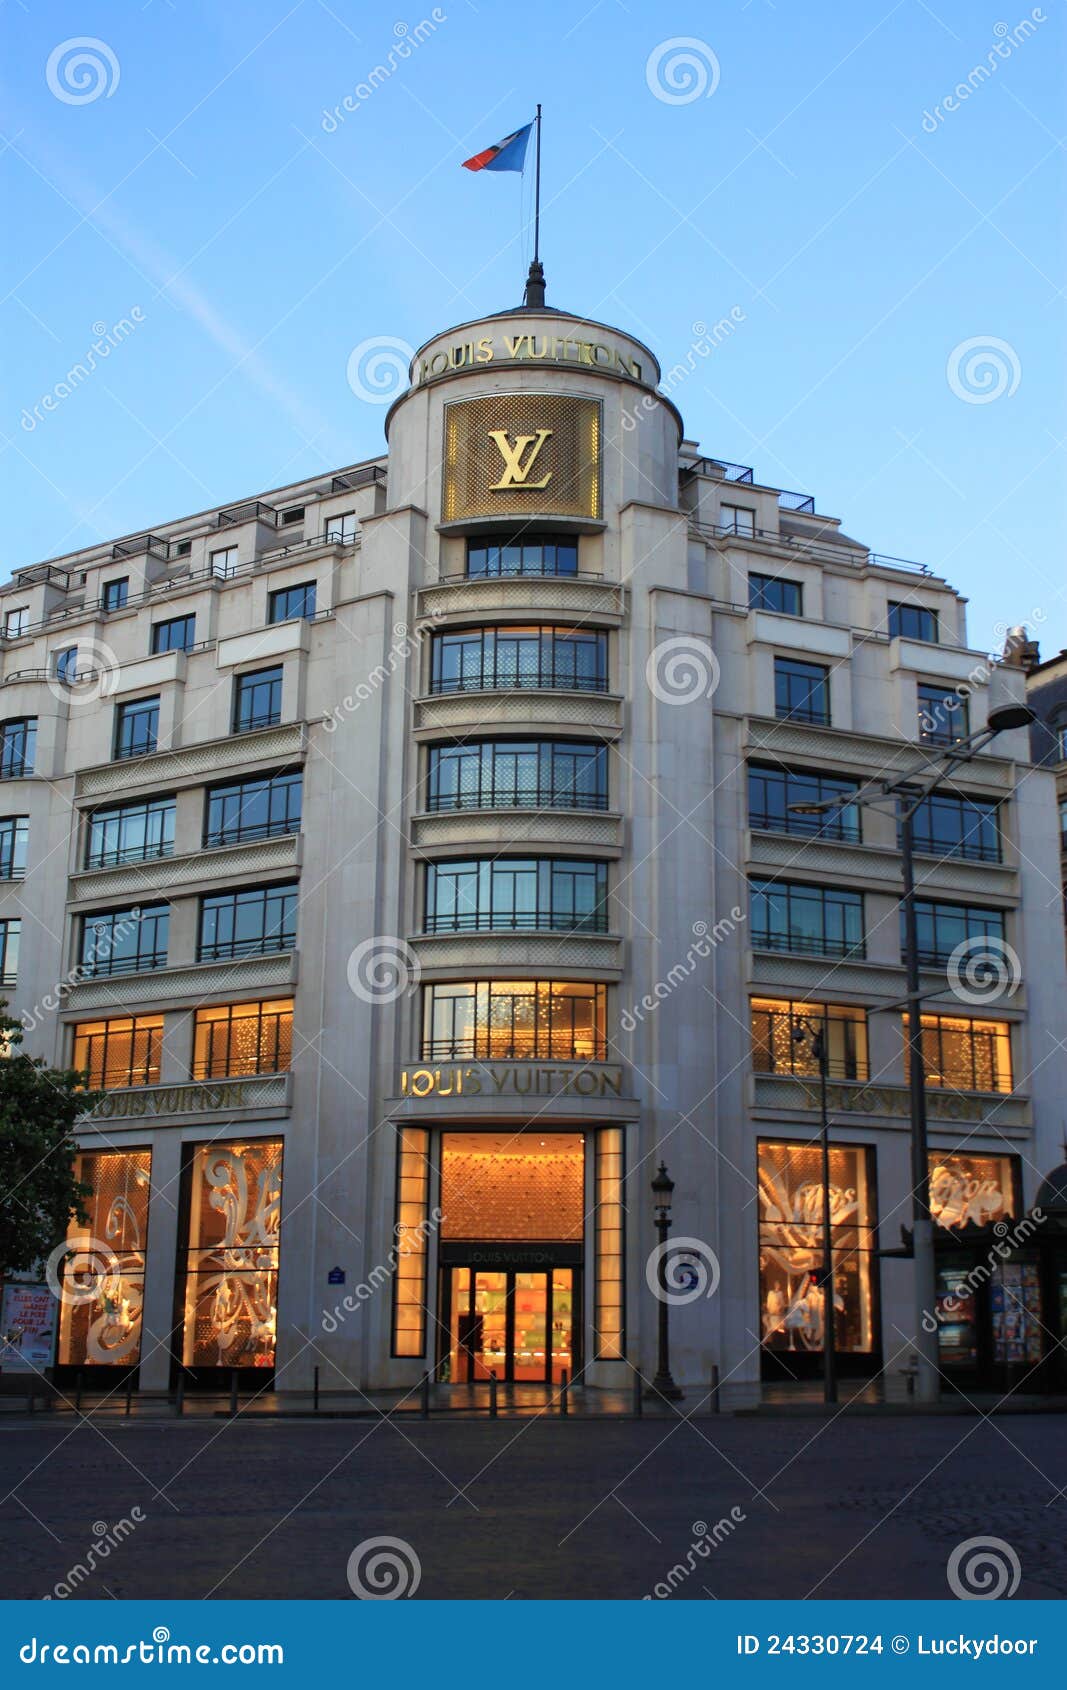 Louis Vuitton Store Editorial Stock Image - Image: 24330724